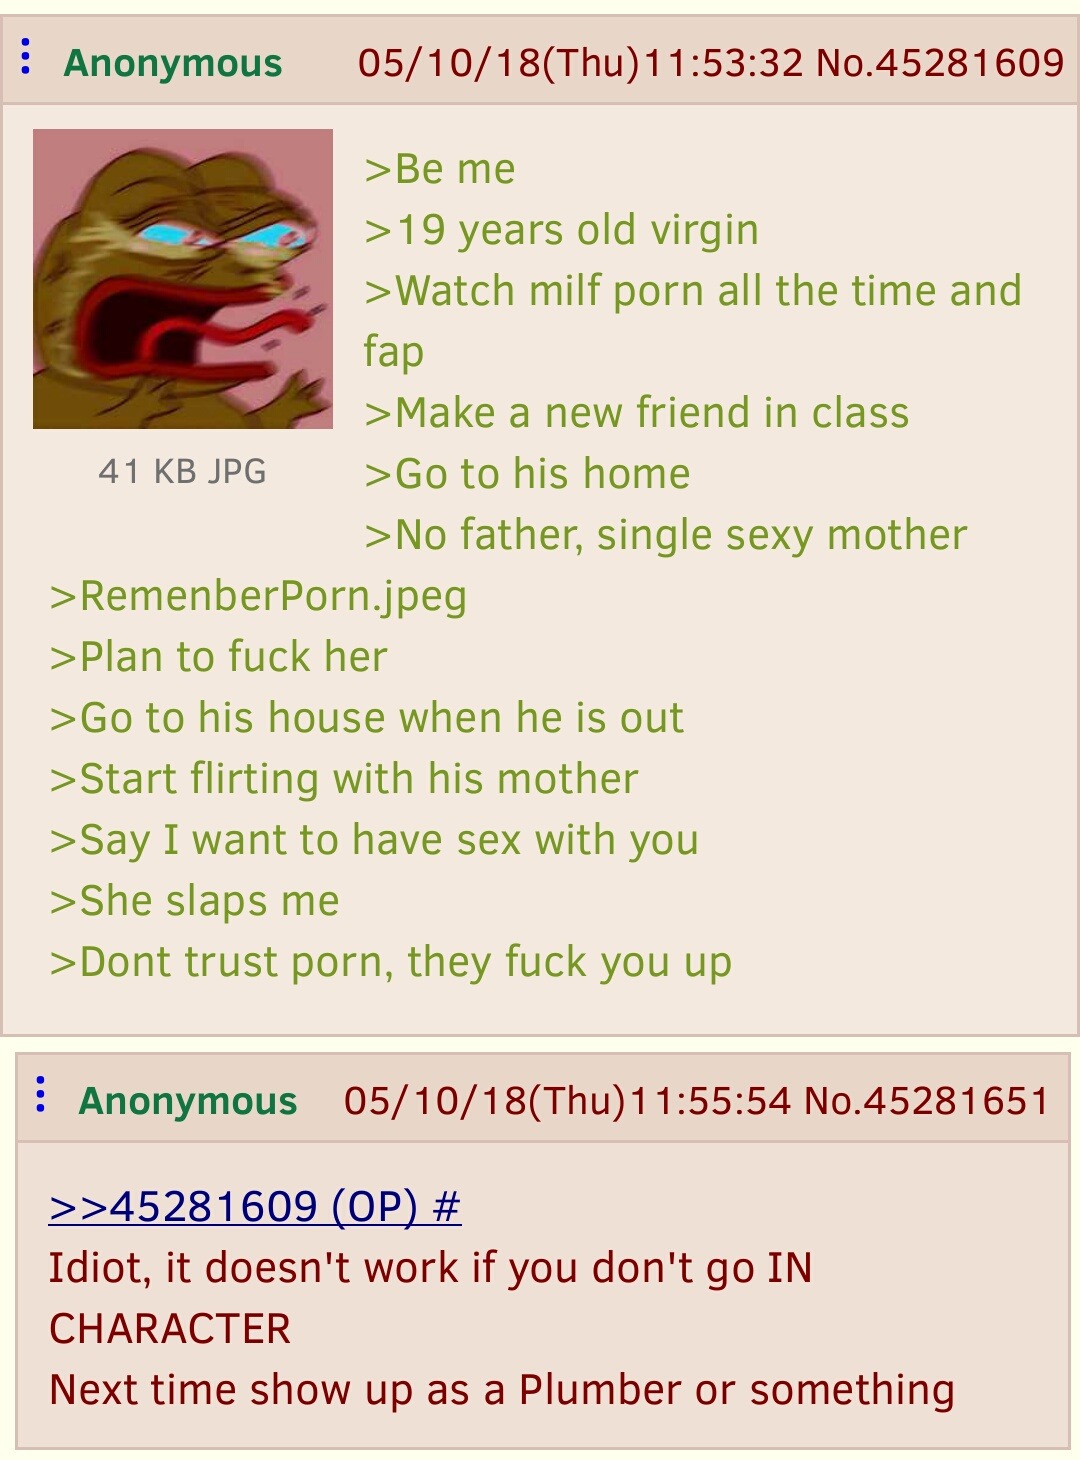 Anon is angry with porn - 4chan - greentext - milf - funny ...